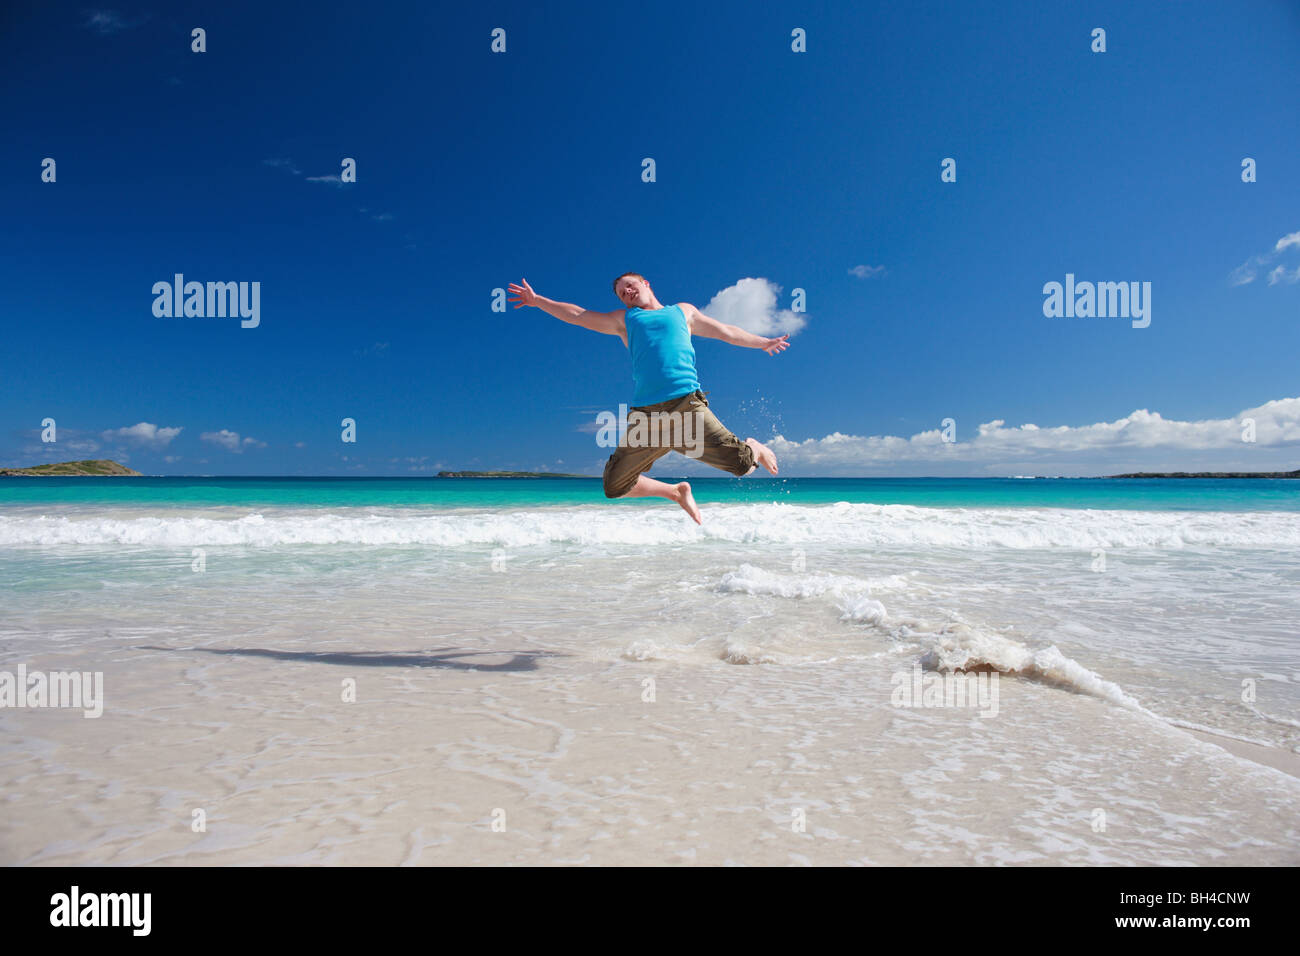 Young man leaping in the air on a deserted tropical beach, smiling Stock Photo